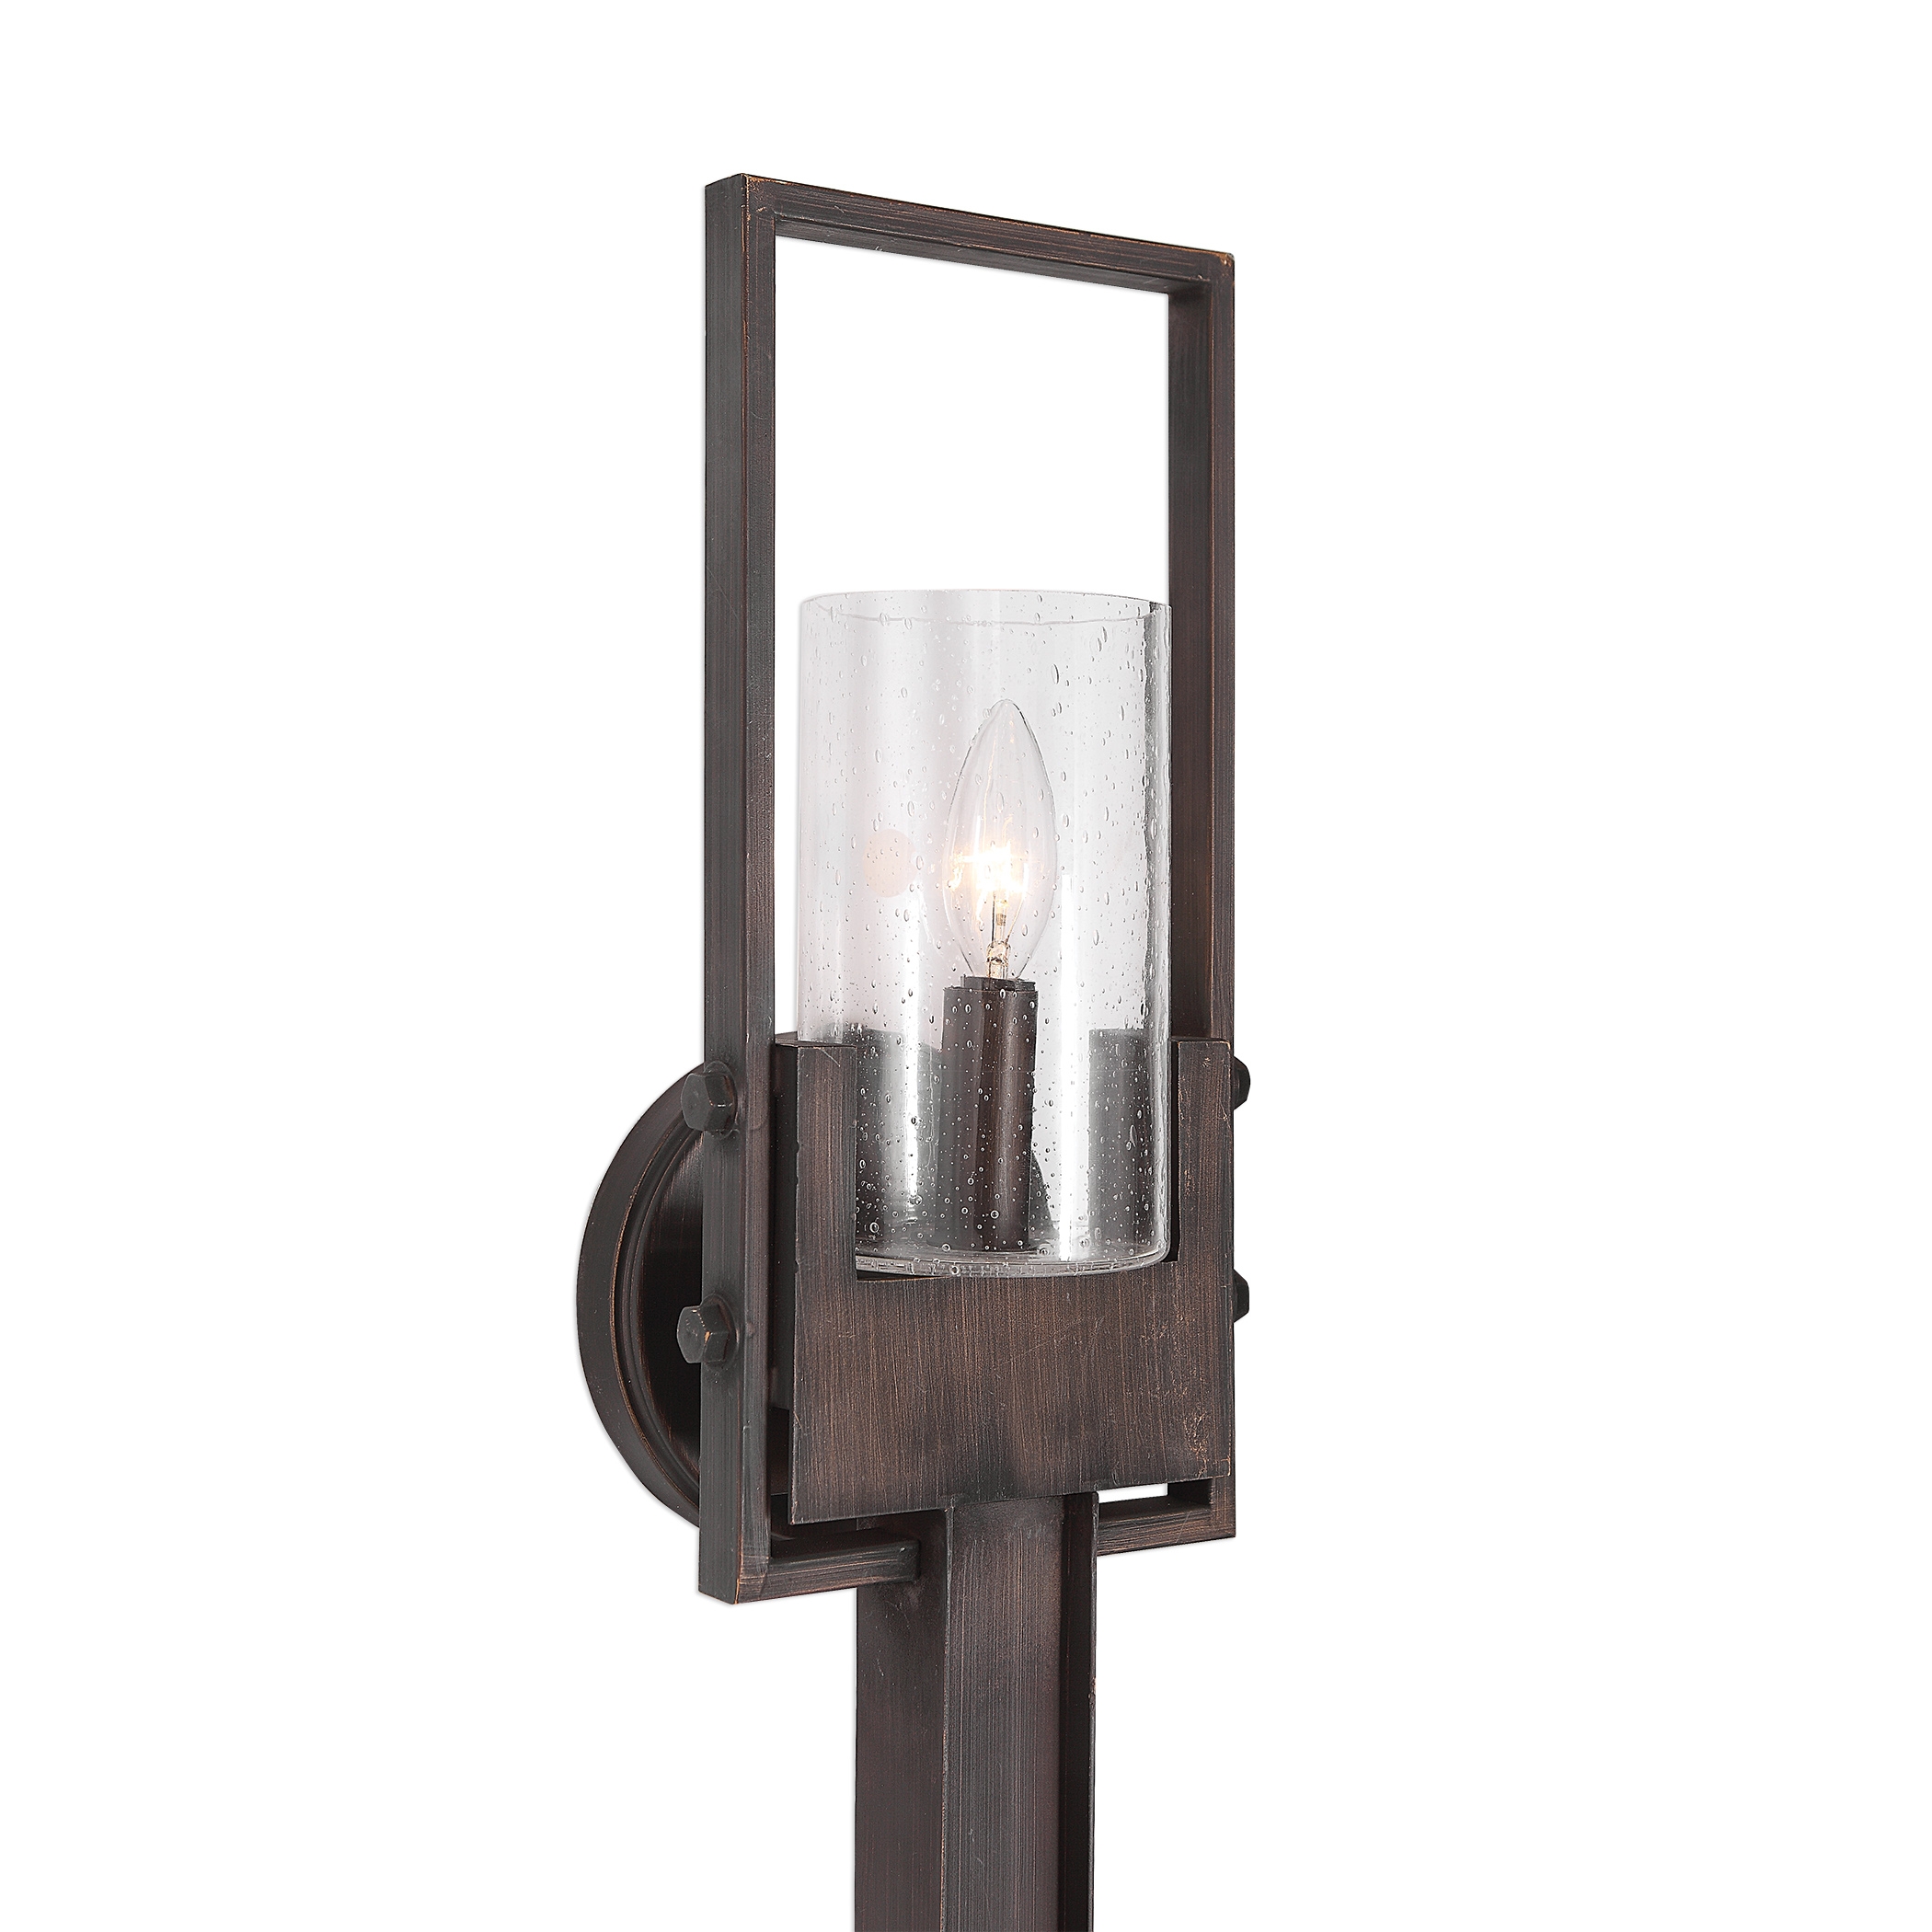 Pinecroft Rustic 1 Light Sconce - Image 1